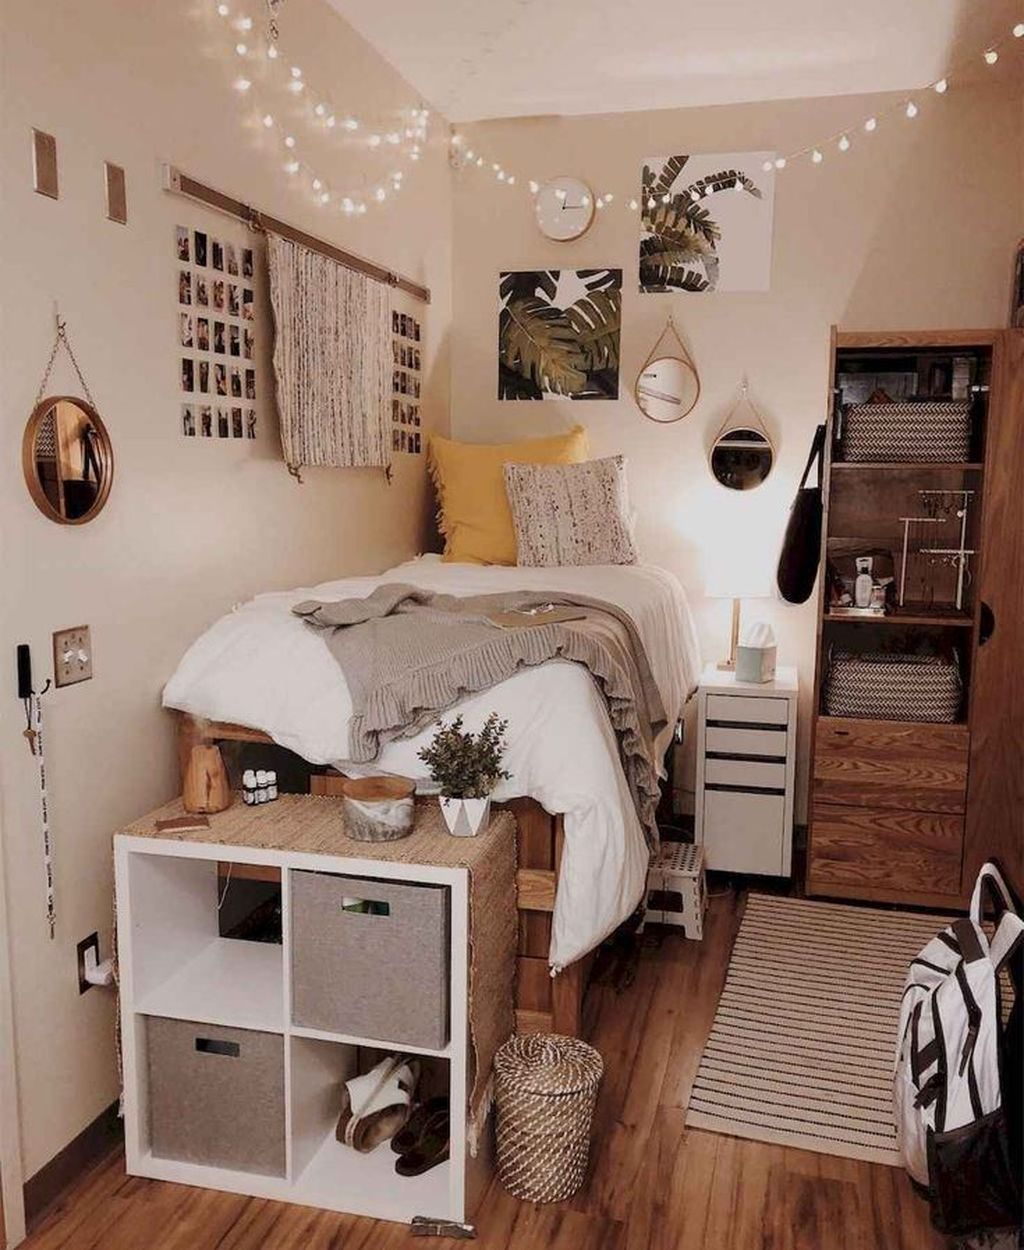 32-the-best-diy-bedroom-decor-ideas-you-have-to-try-pimphomee